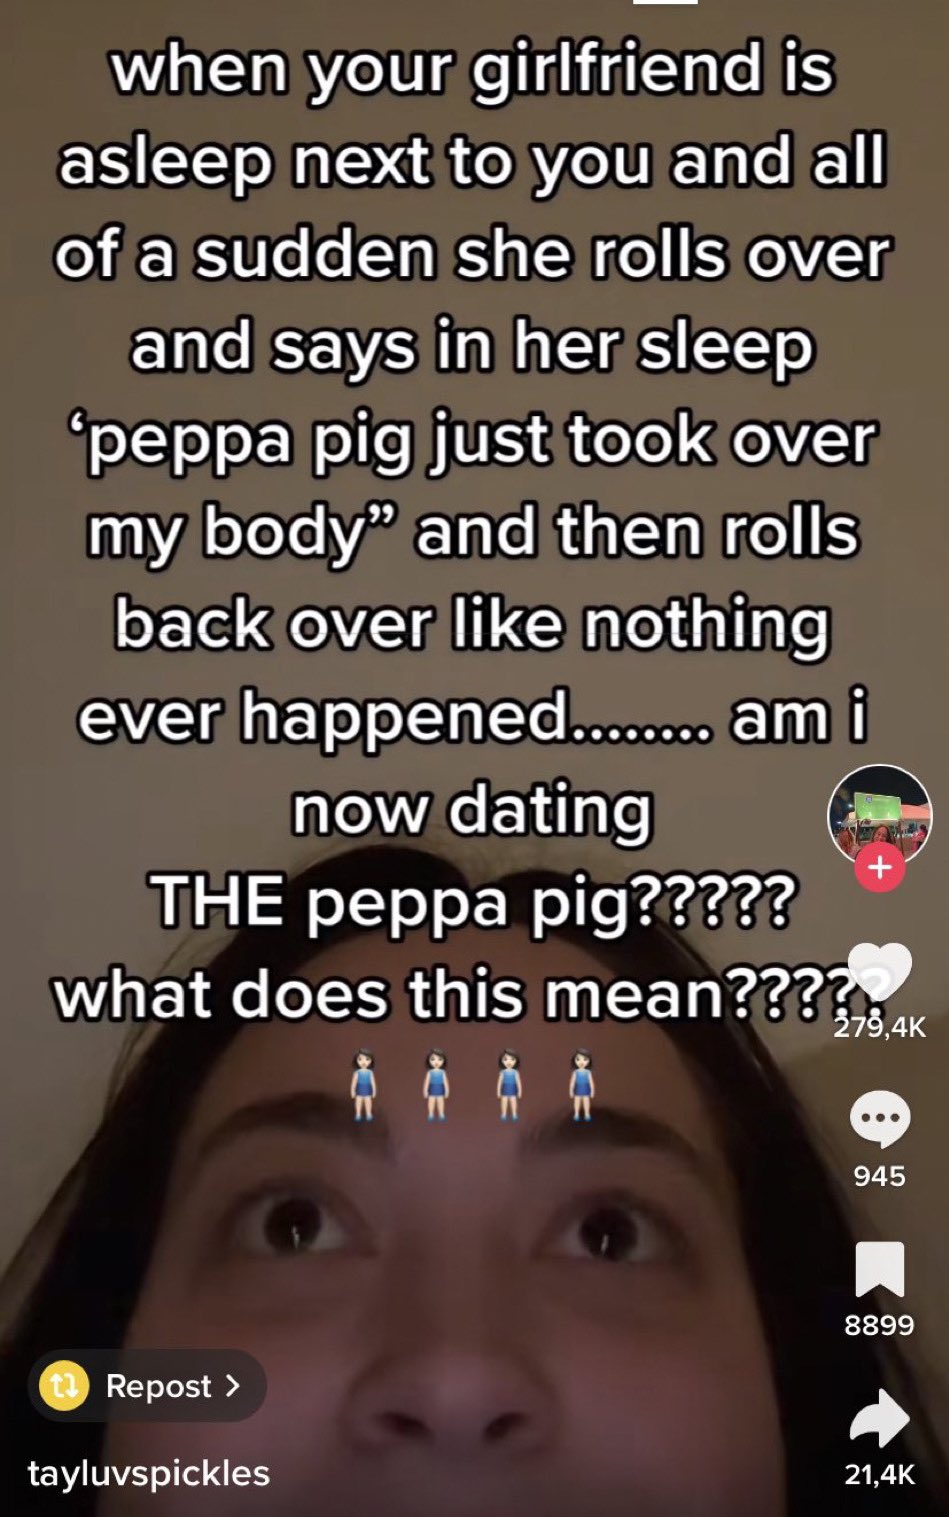 TikTok screenshots - Video - when your girlfriend is asleep next to you and all of a sudden she rolls over and says in her sleep 'peppa pig just took over my body